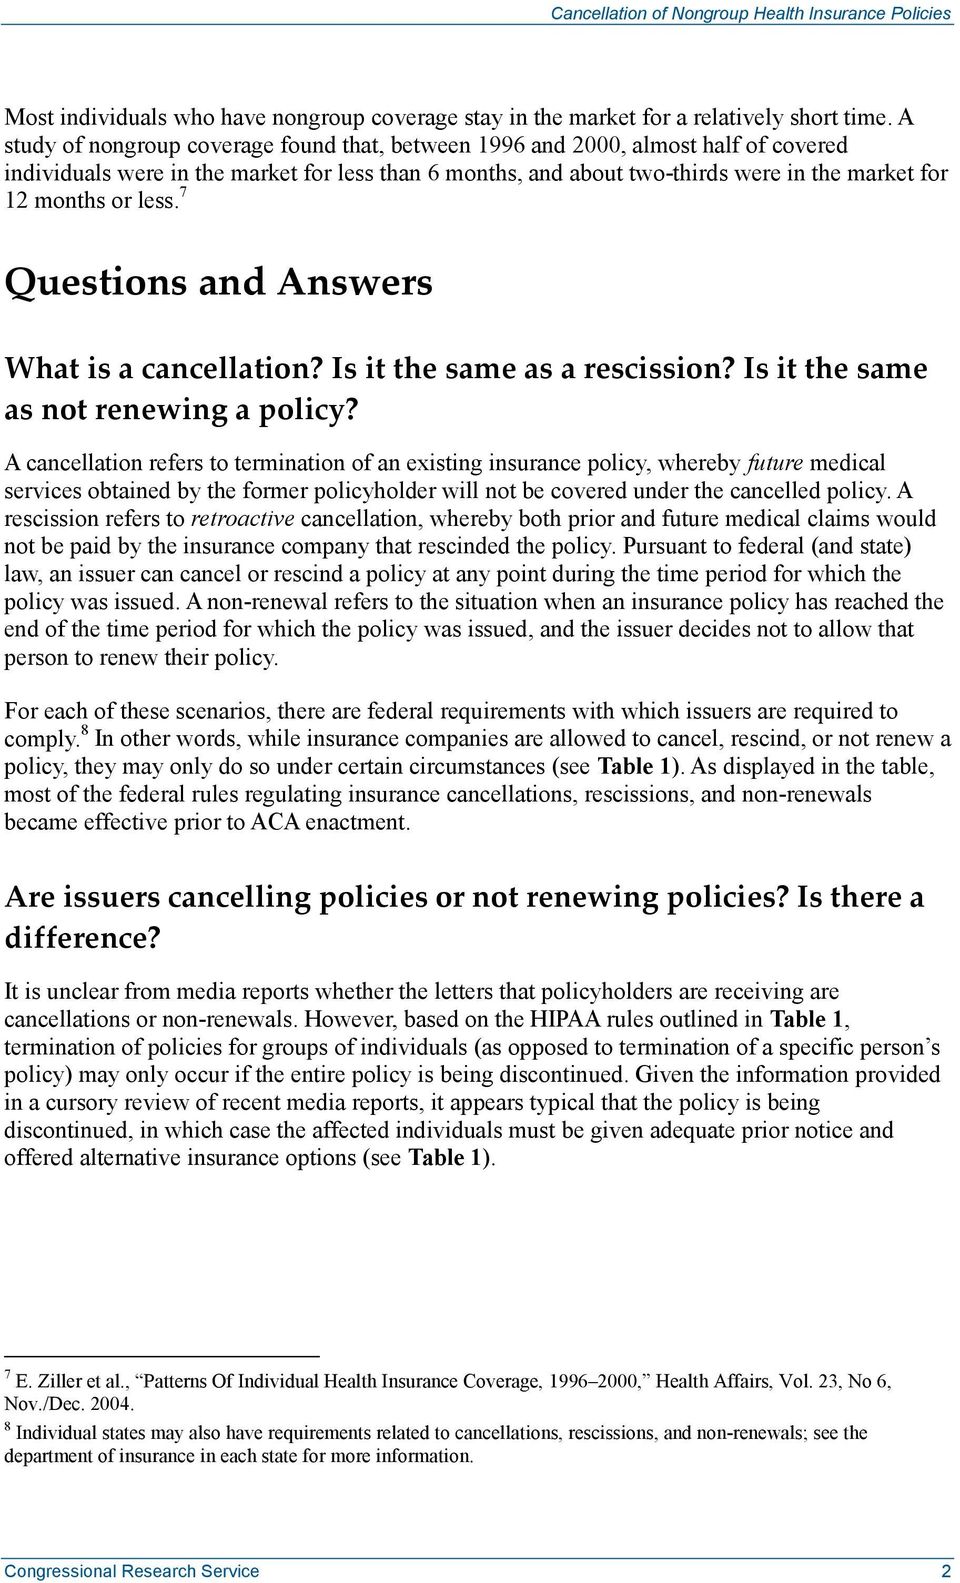 less. 7 Questions and Answers What is a cancellation? Is it the same as a rescission? Is it the same as not renewing a policy?